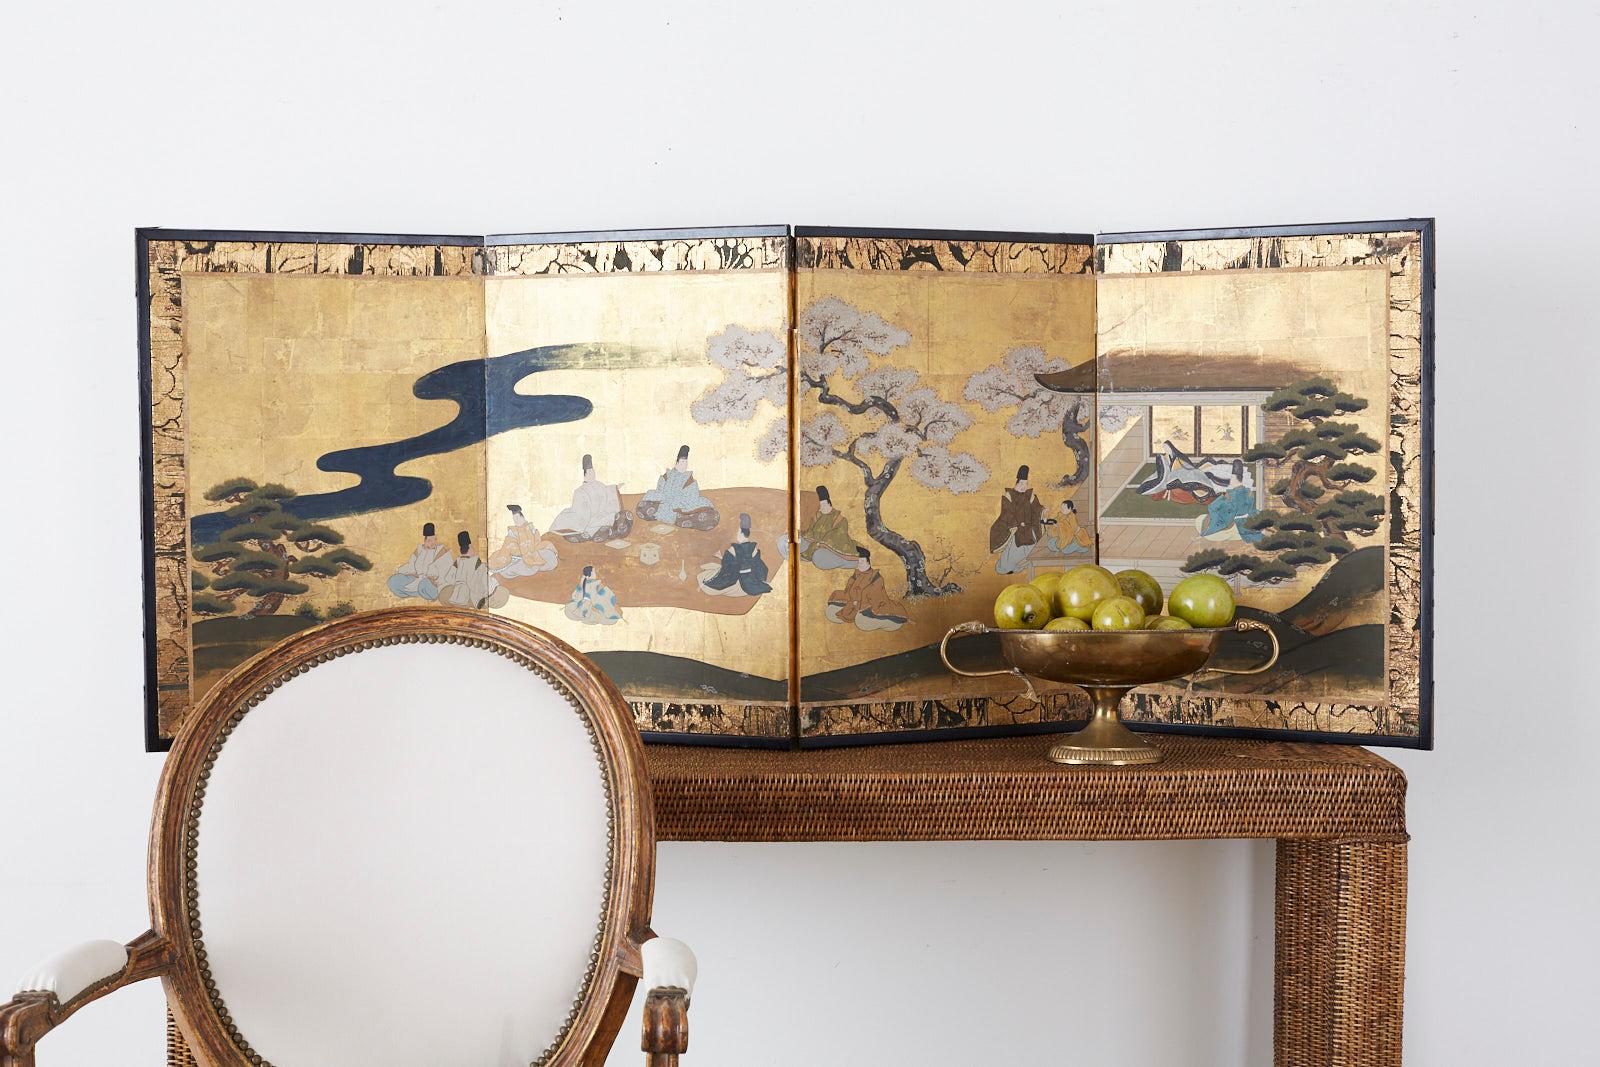 Stunning Japanese four panel screen depicting an idyllic spring scene from the narrative tales of Genji. The screen is painted in a Nihonga school style on squares of gold leaf. The characters dressed in beautifully detailed robes are having a